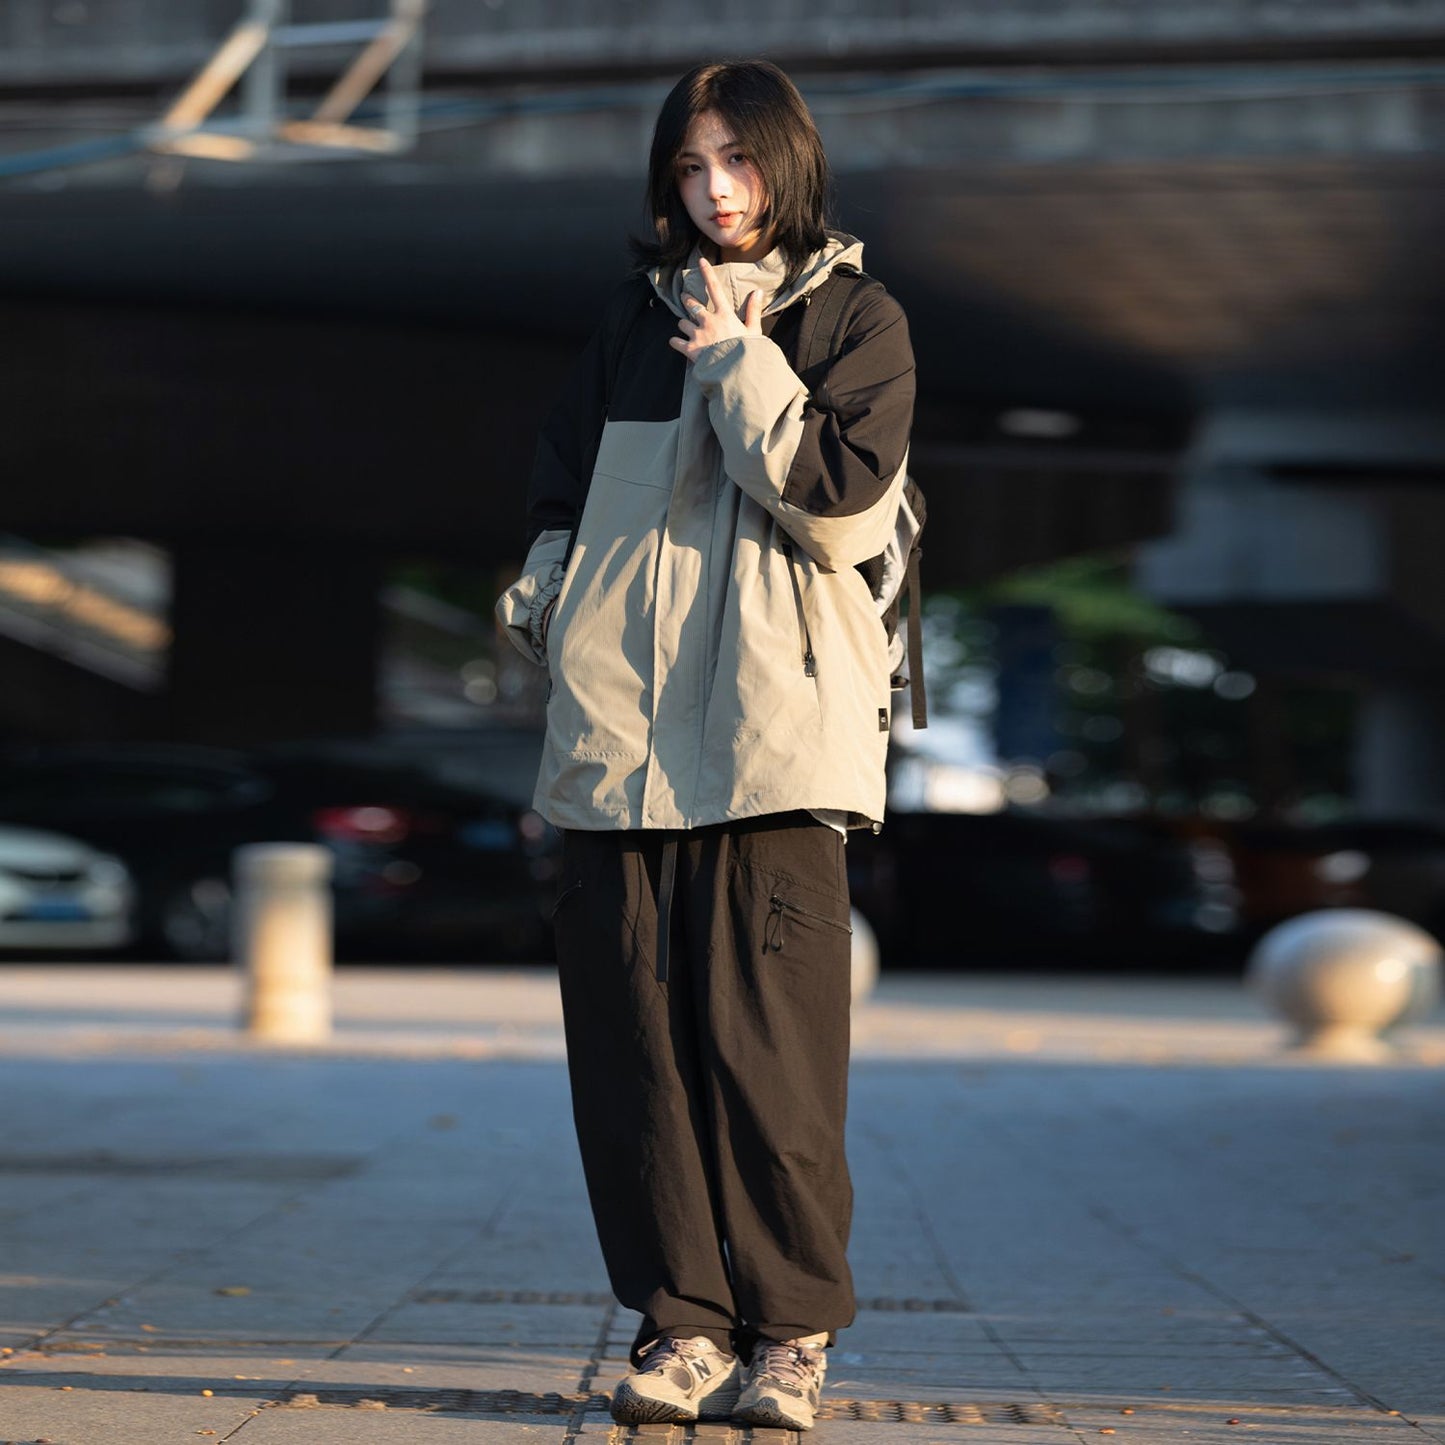 [Oneblue Shop] 2 in 1 Jacket Parka Jacket Two Piece ls100501 [2 pieces including inner]